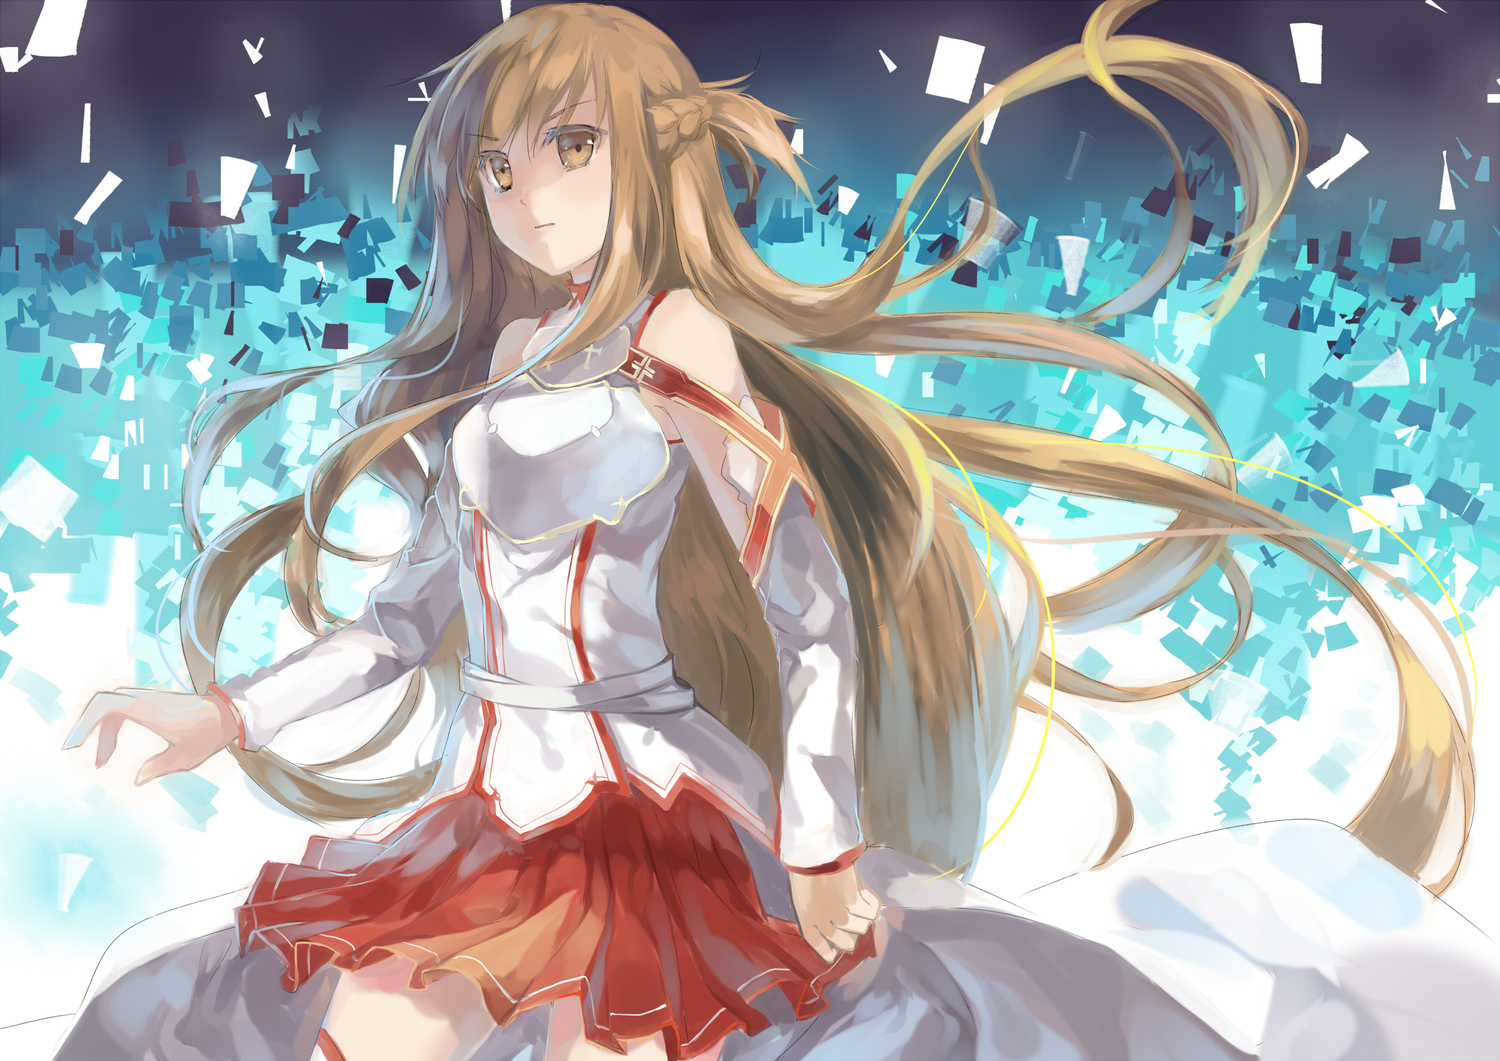 Asuna 16 Wallpapers | Your daily Anime Wallpaper and Fan Art